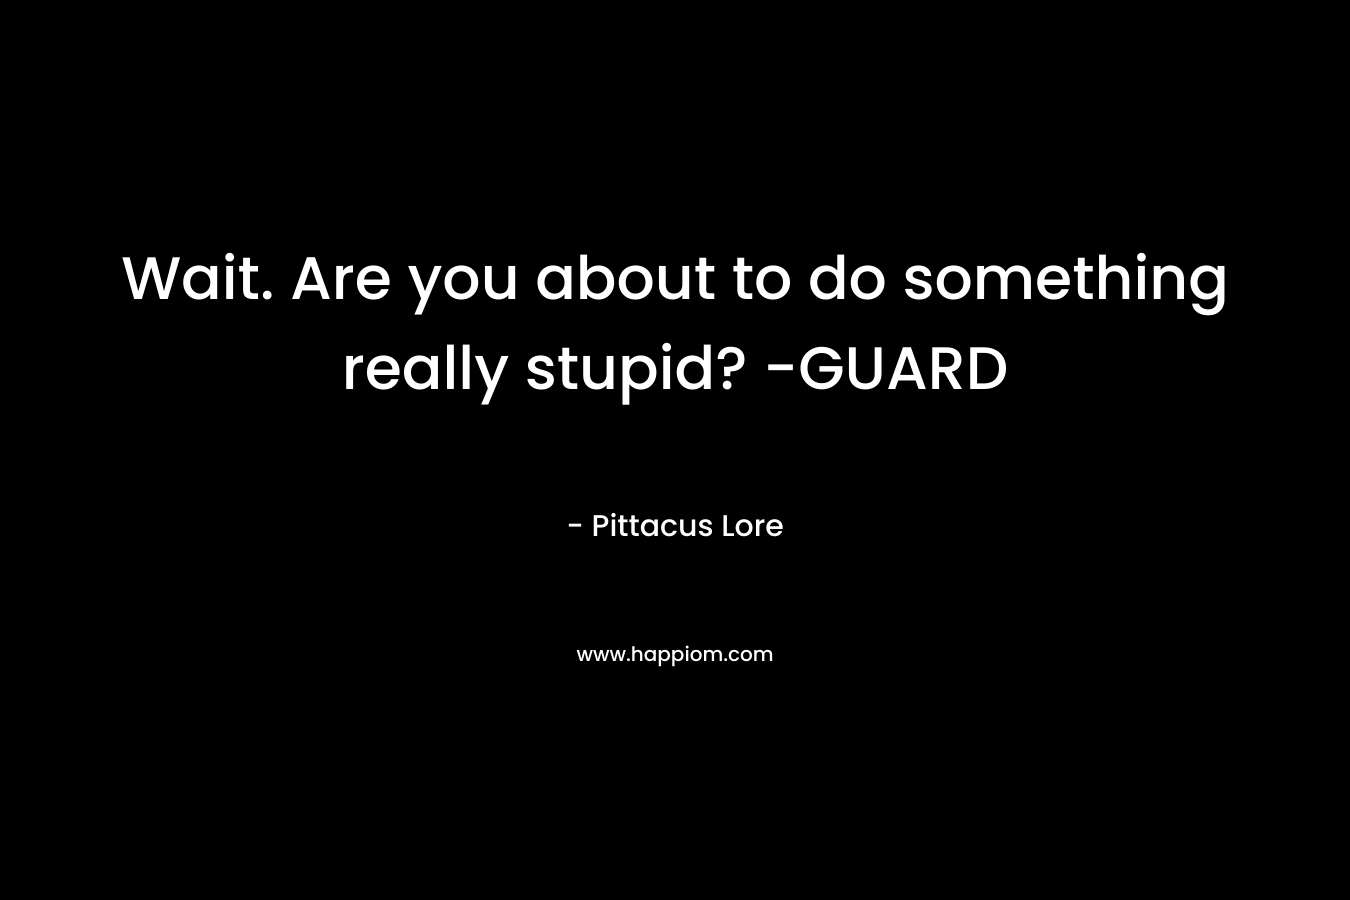 Wait. Are you about to do something really stupid? -GUARD – Pittacus Lore